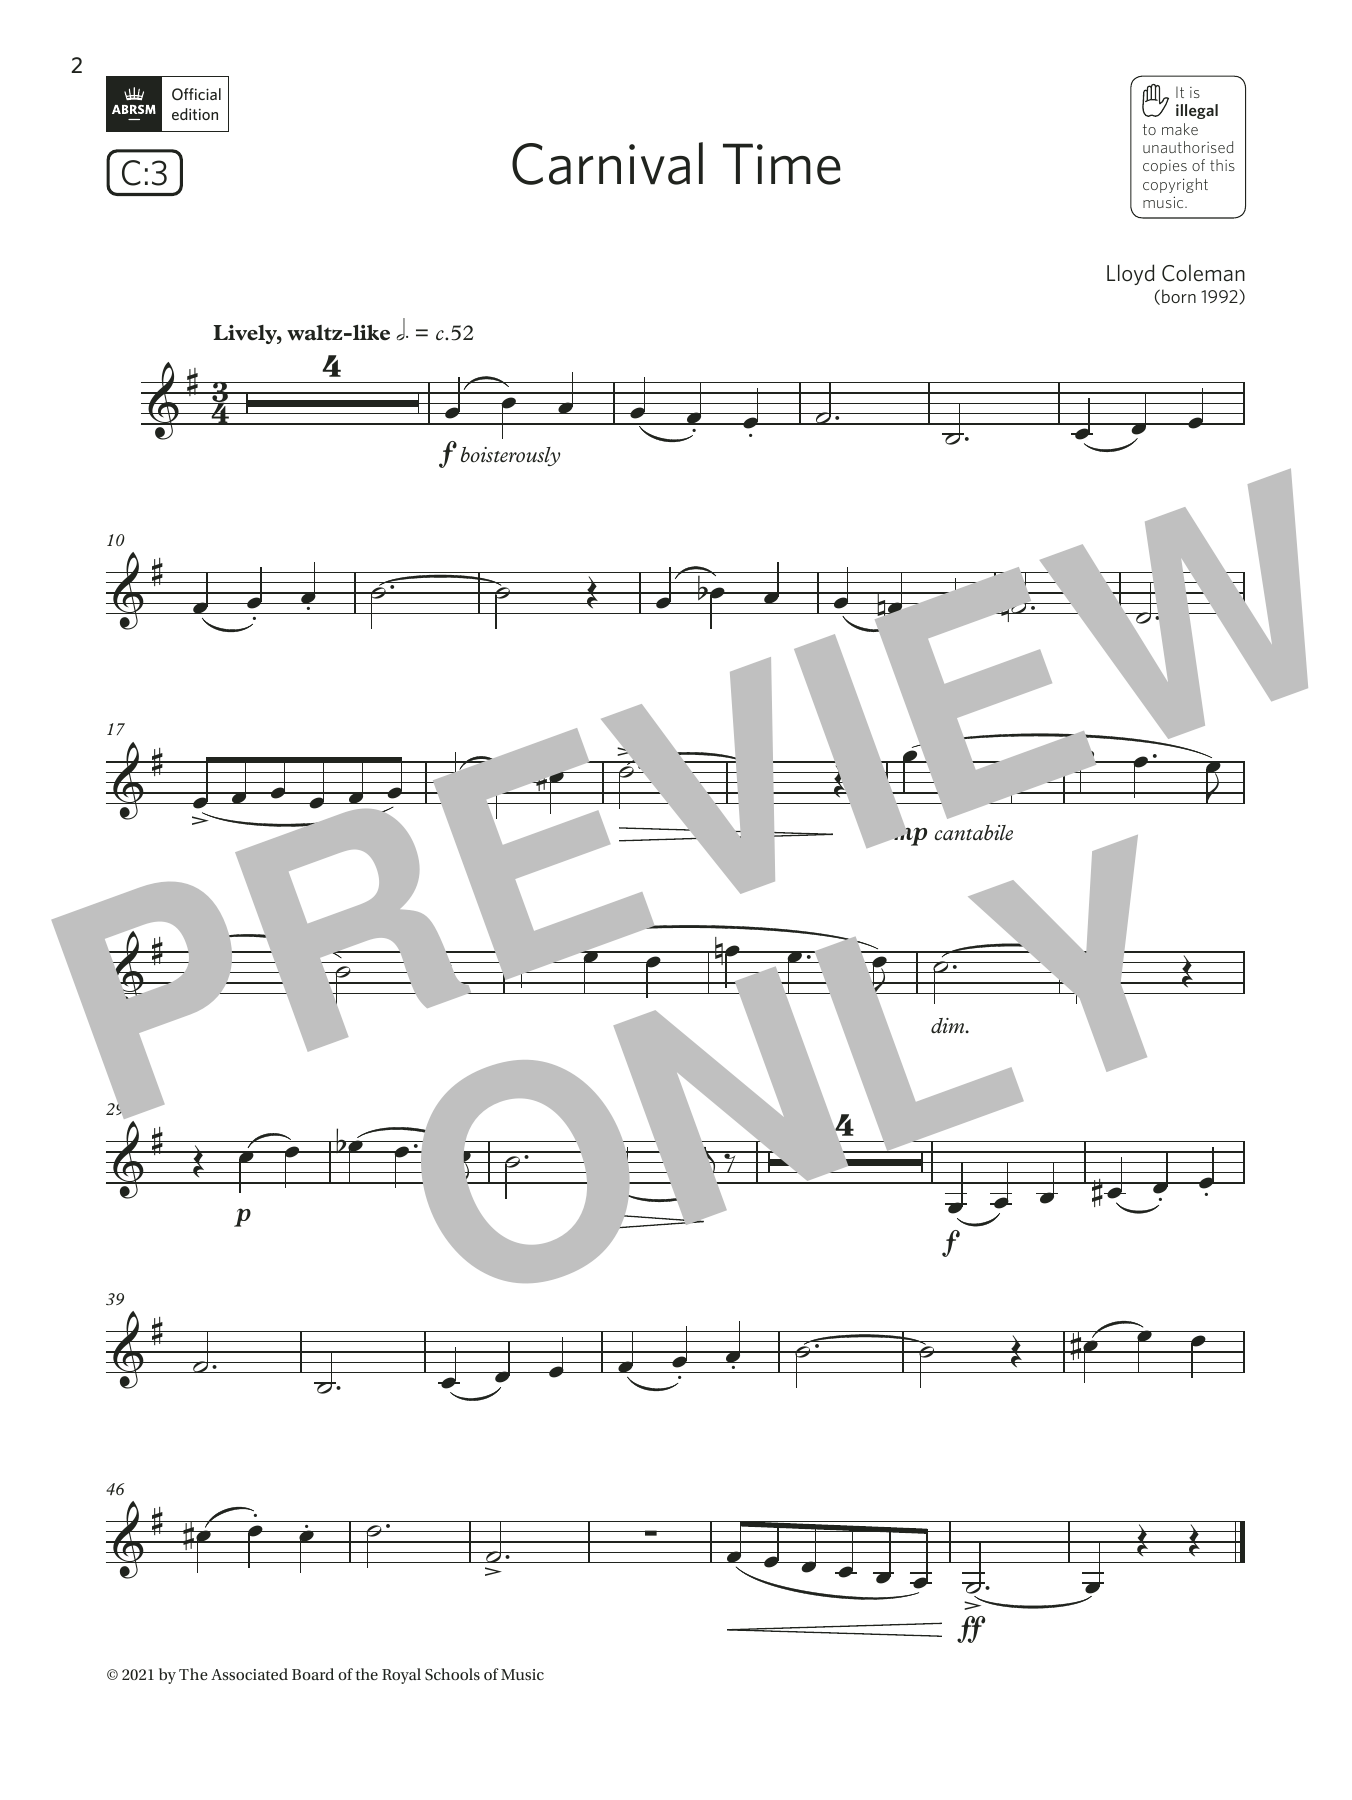 Download Lloyd Coleman Carnival Time (Grade 2 List C3 from the Sheet Music